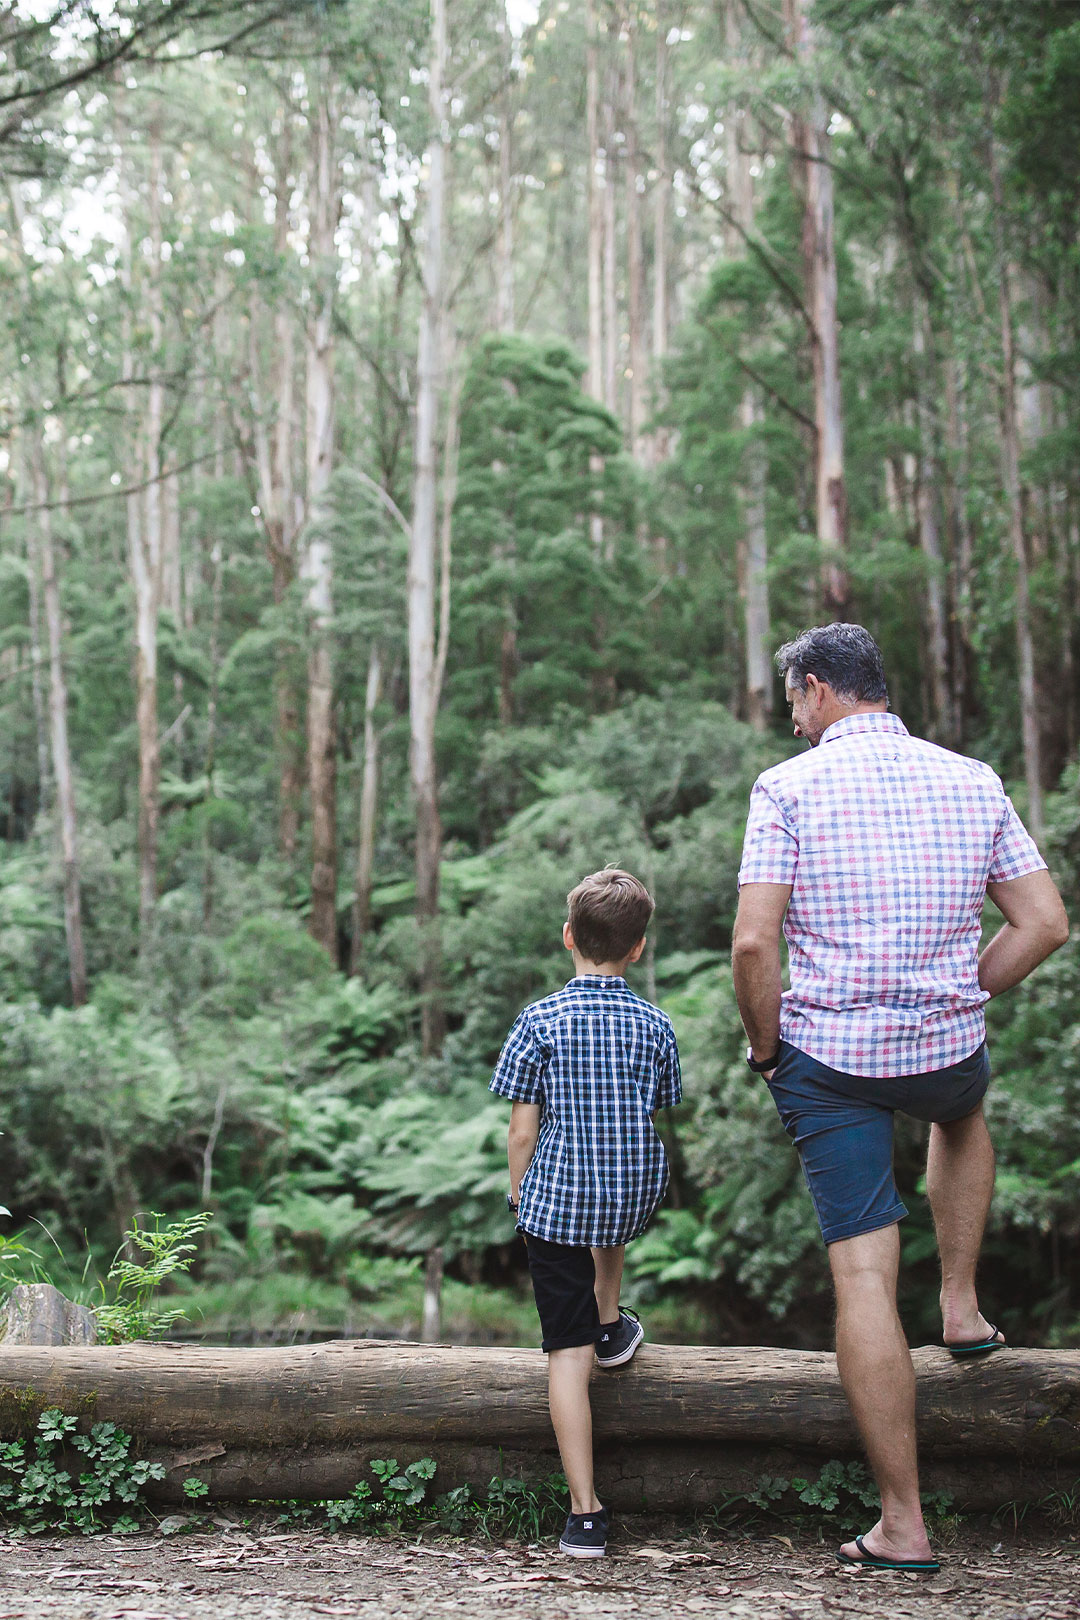 Greg Erwin and one of his sons admiring the tropical bush on a casual walk